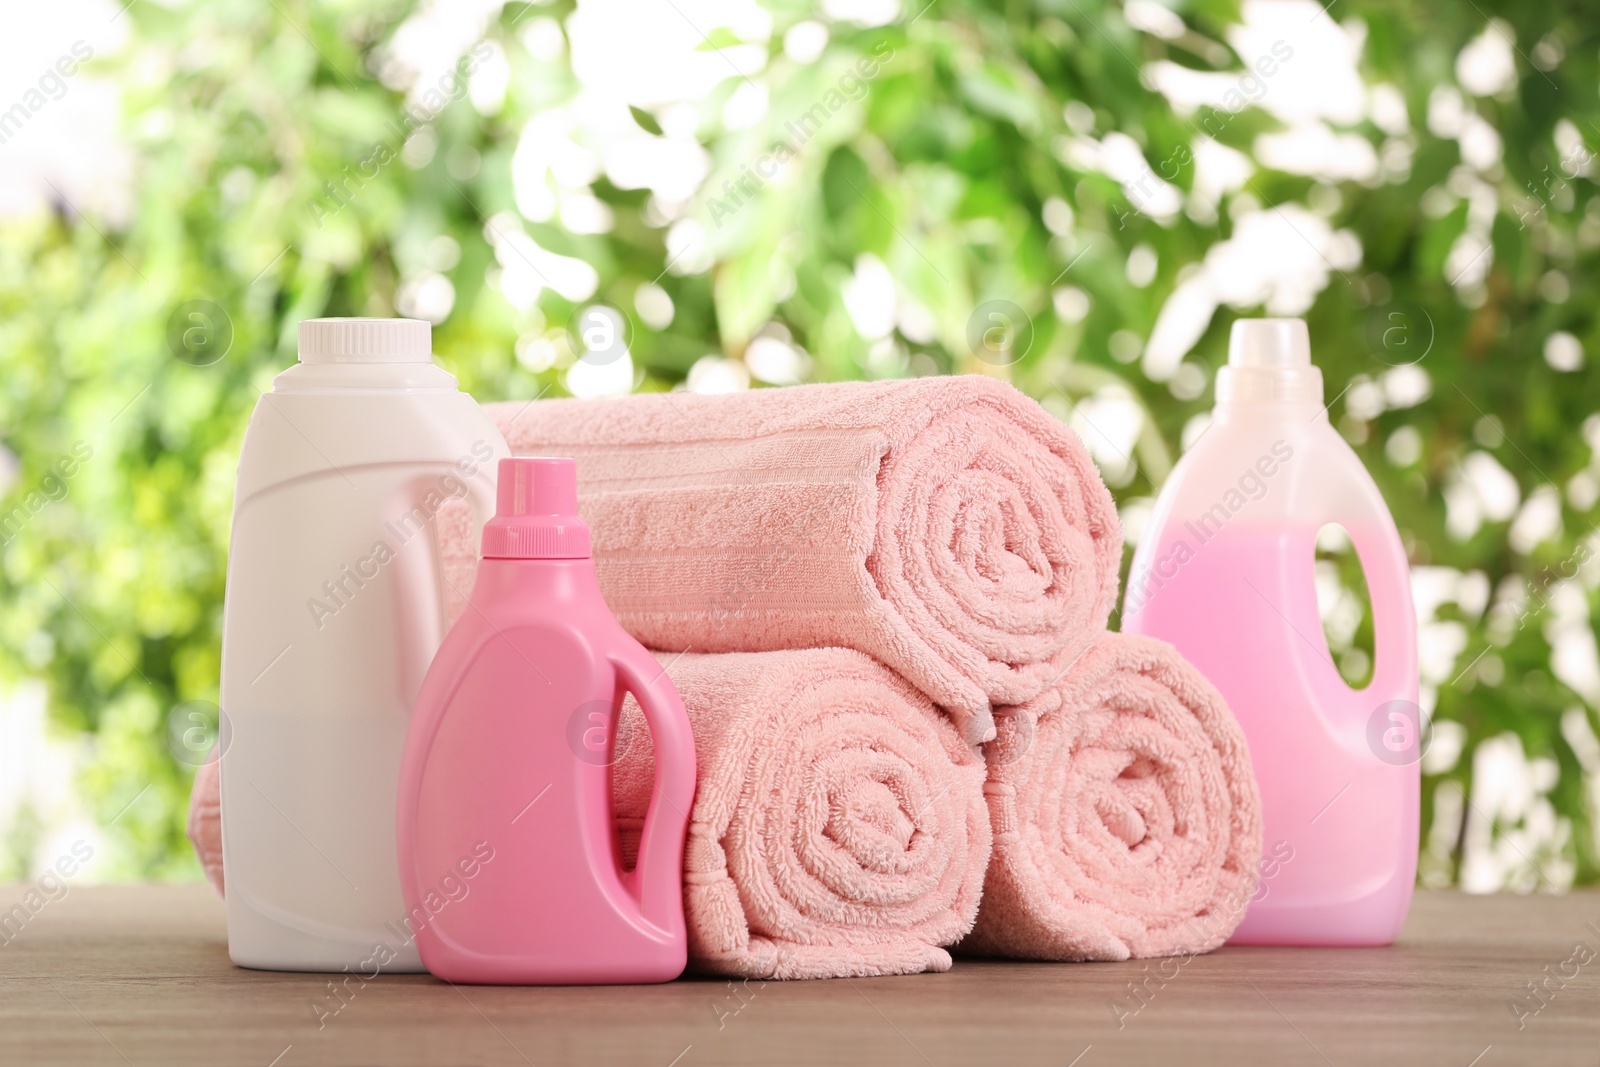 Photo of Rolled towels and detergents on wooden table against blurred background